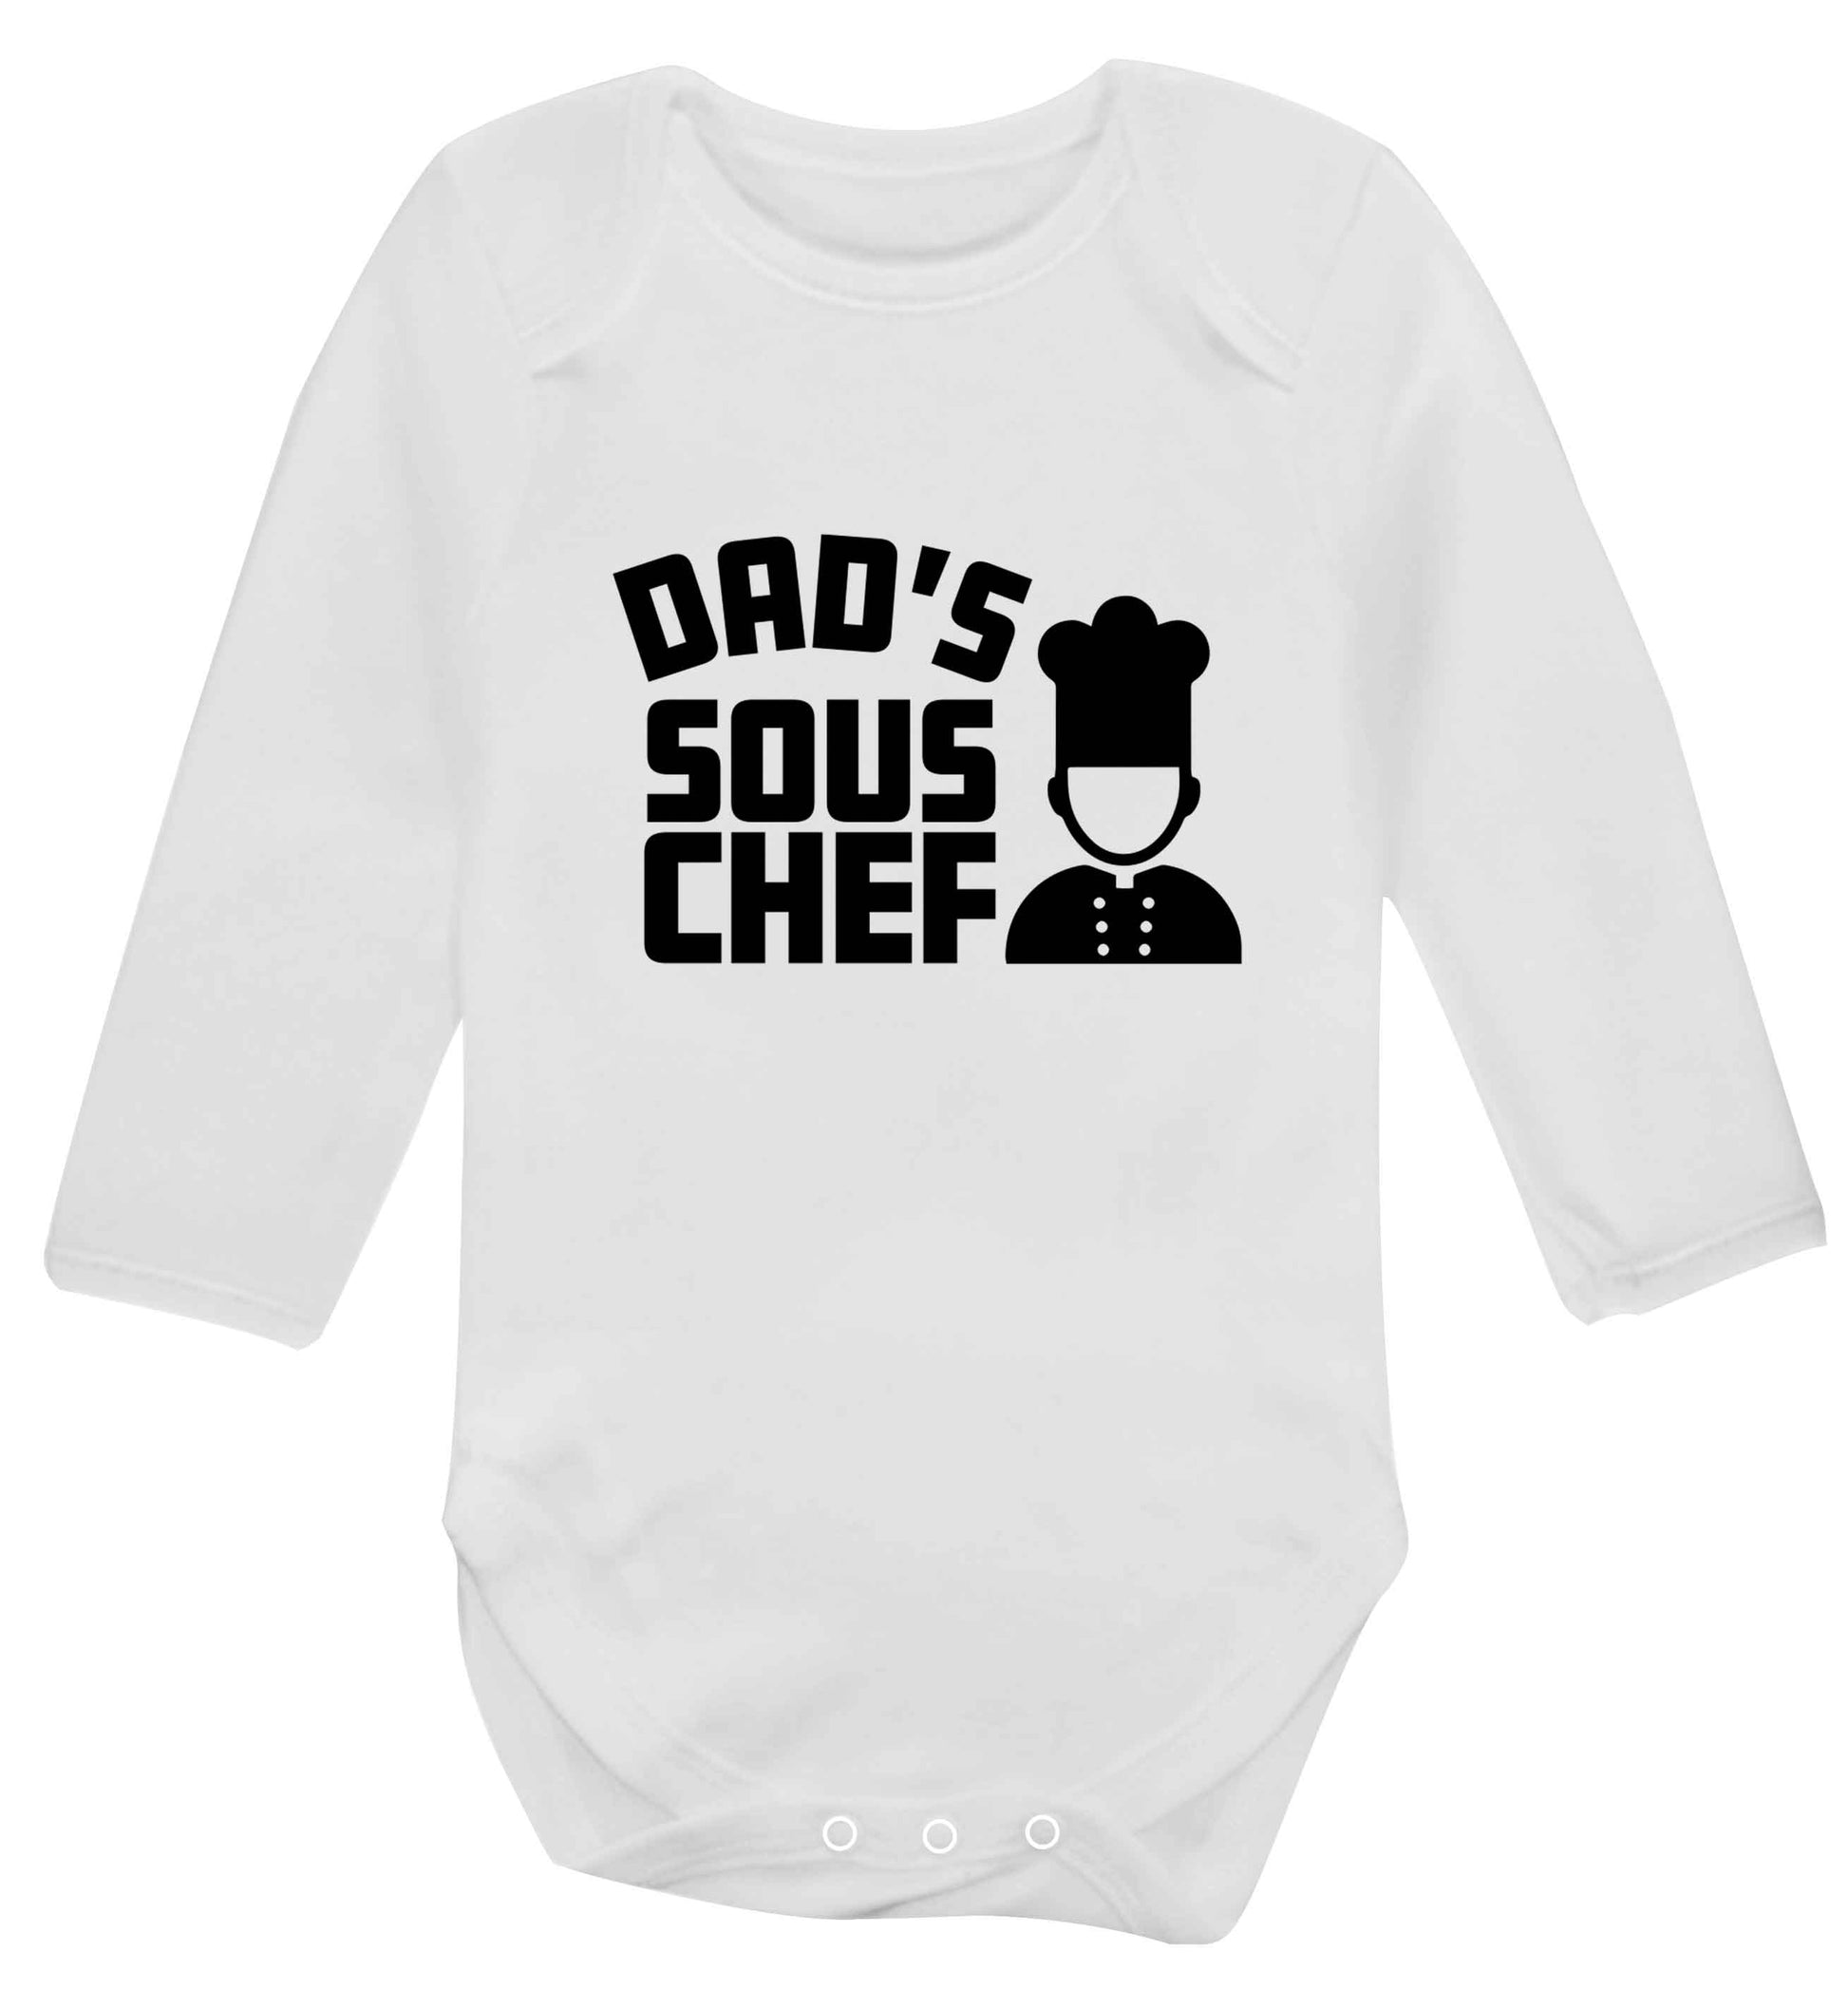 Dad's sous chef baby vest long sleeved white 6-12 months